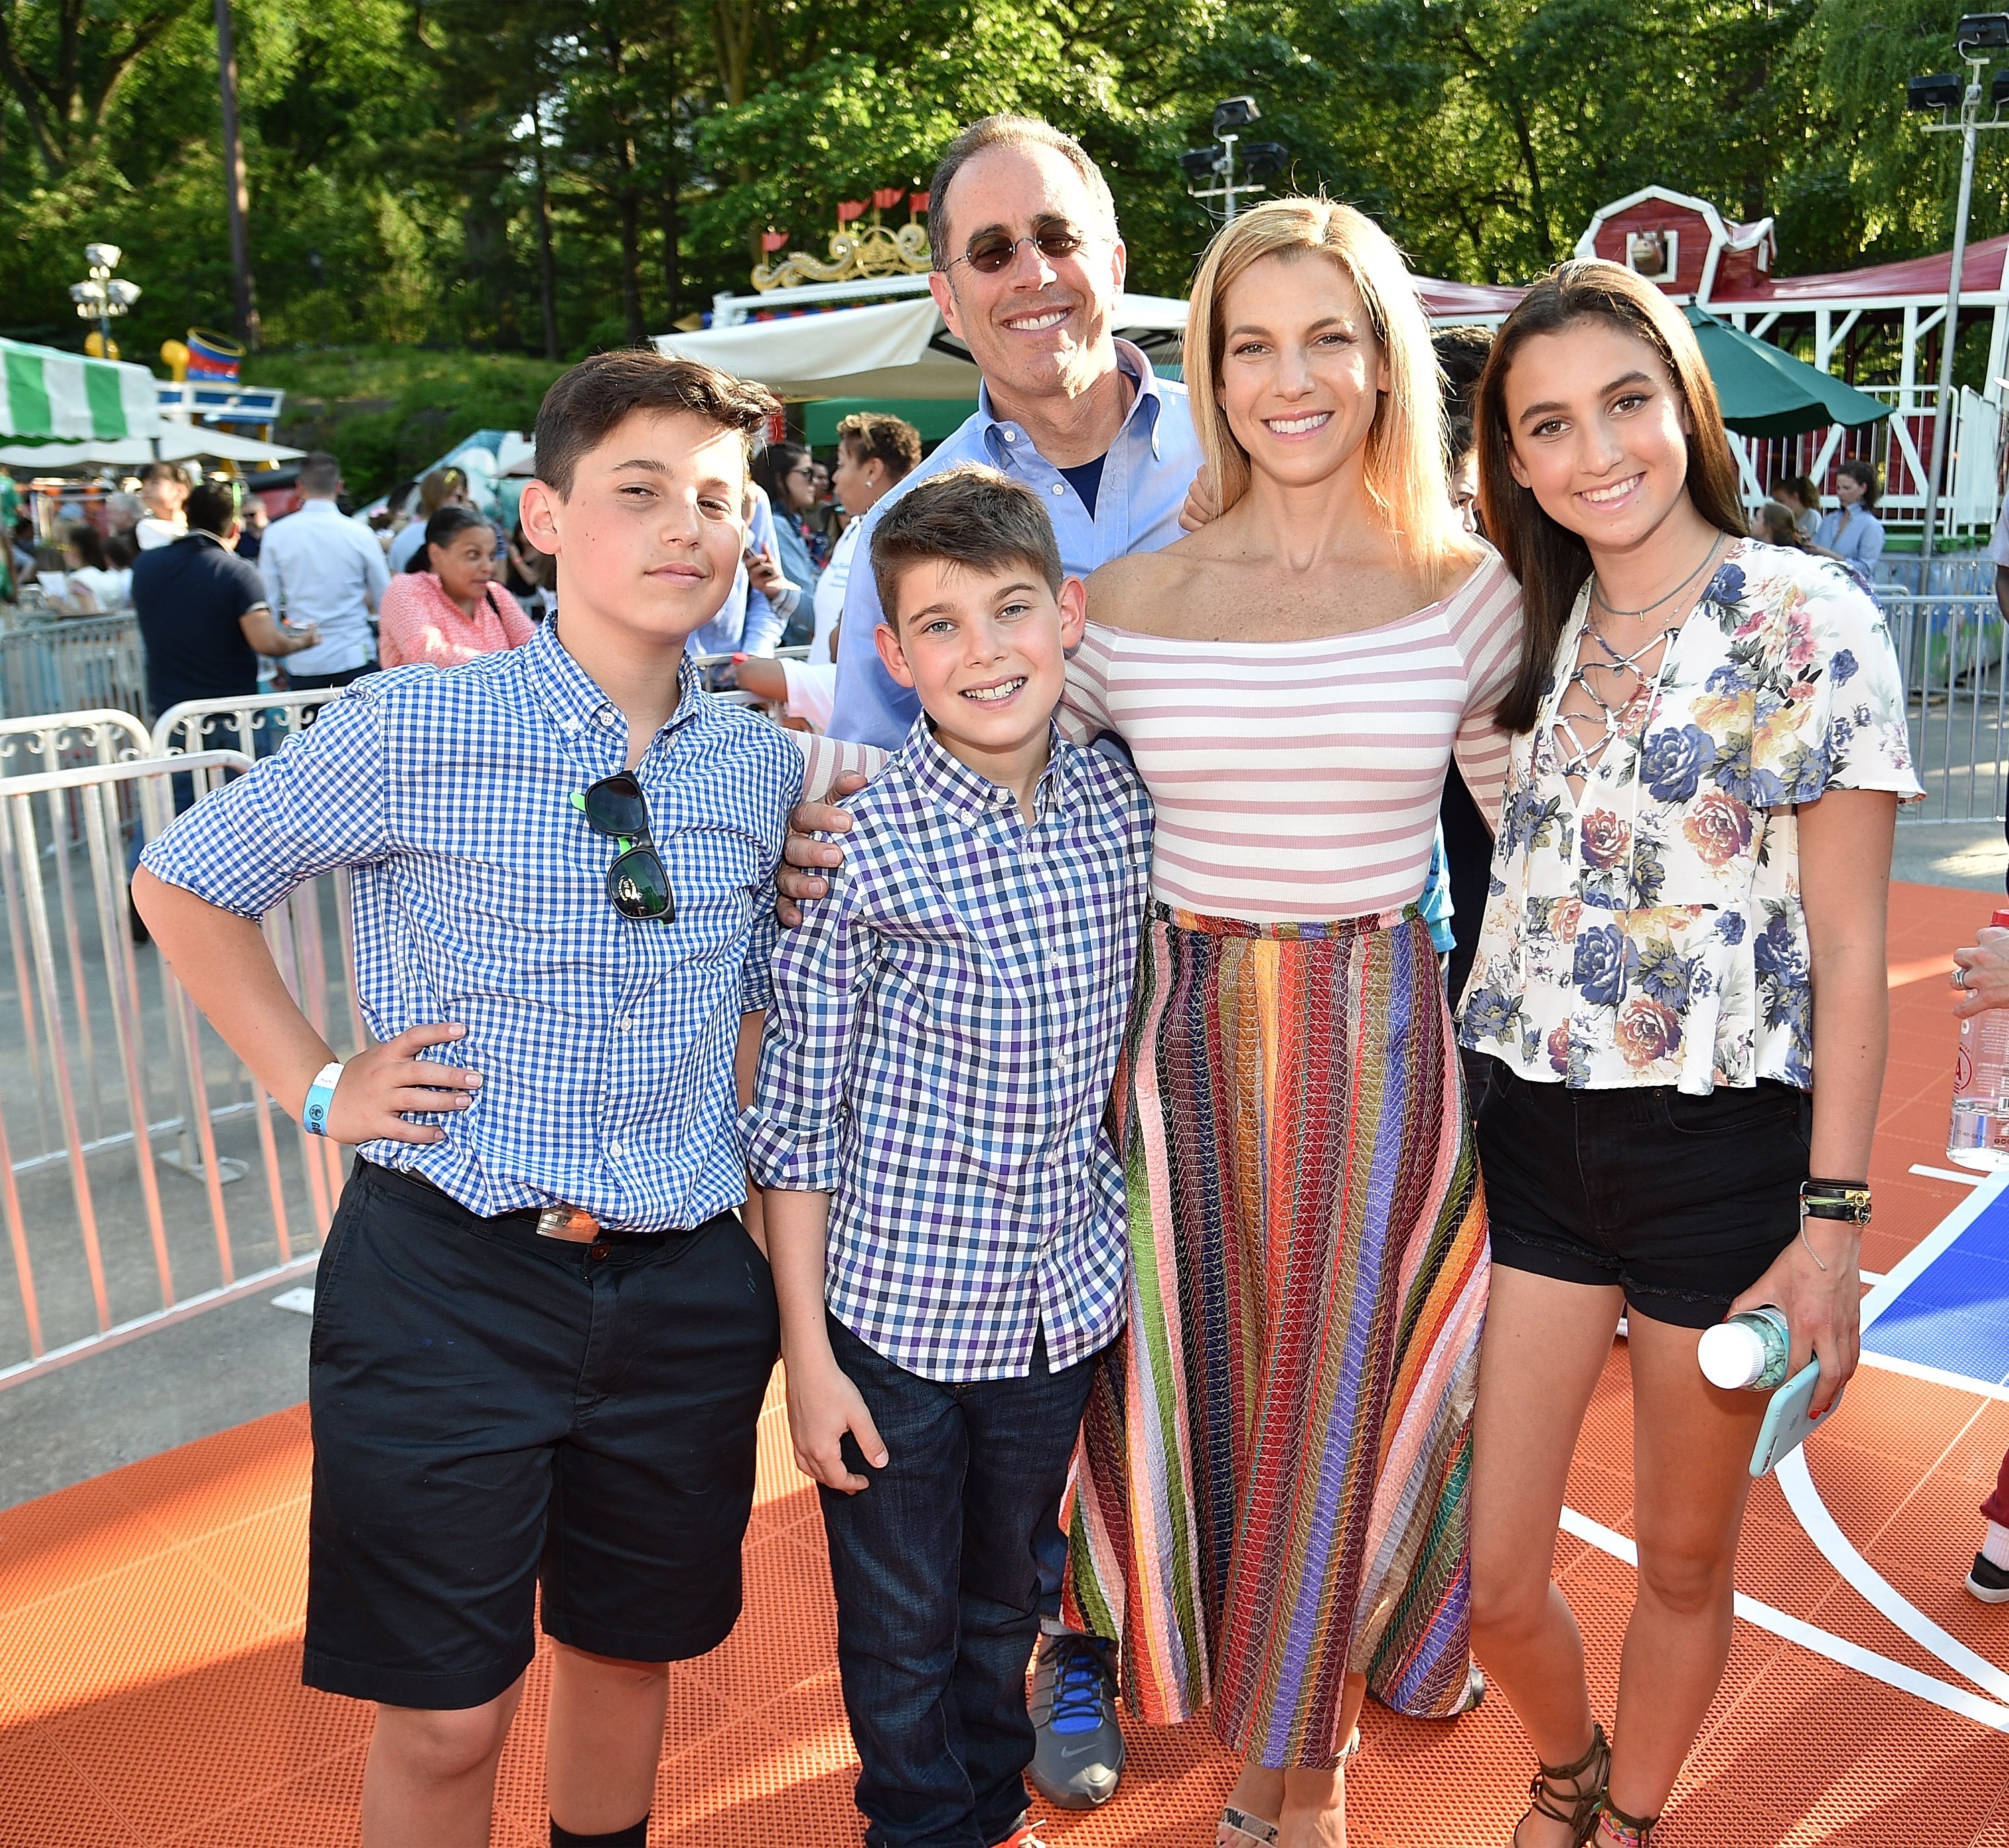 Jerry Seinfeld and his wife, Jessica Seinfeld with their children Shepherd Seinfeld,  Julian Seinfeld, and Sascha Seinfeld attend GOOD+ Foundation's 2017 NY Bash at Victorian Gardens in Central park on May 31, 2017 in New York City. | Source: Getty Images